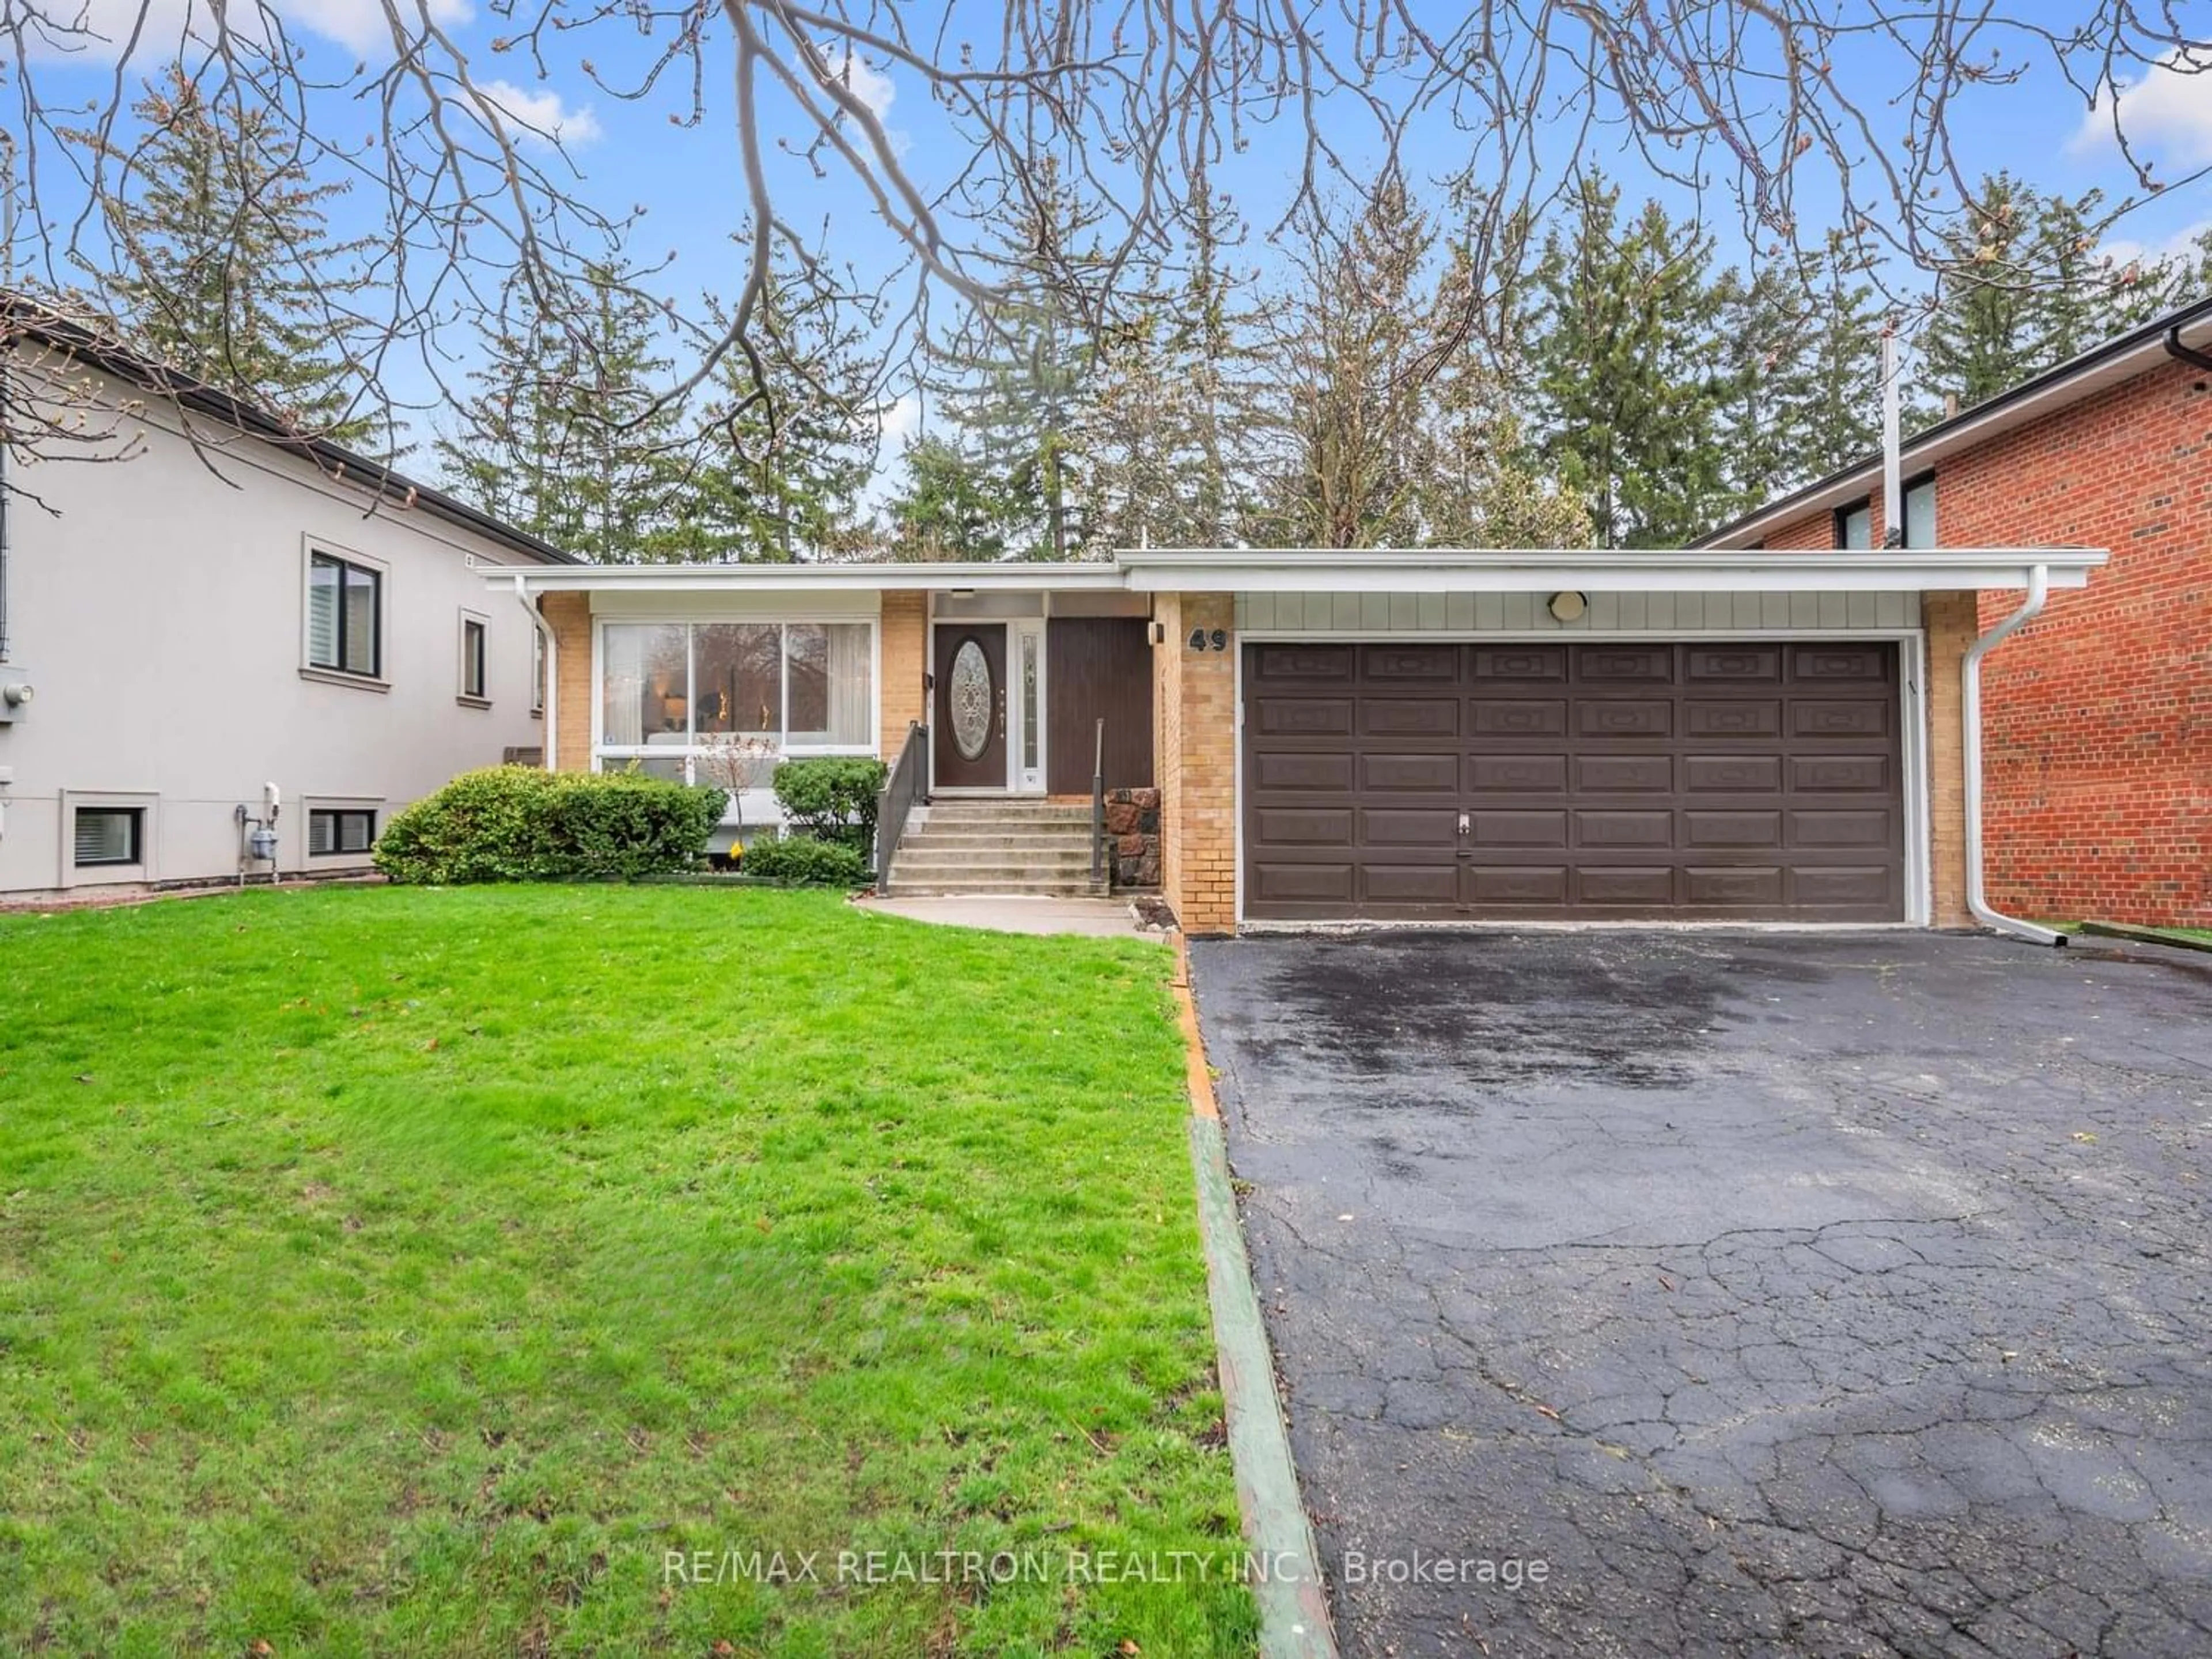 Frontside or backside of a home for 49 Palm Dr, Toronto Ontario M3H 2B5